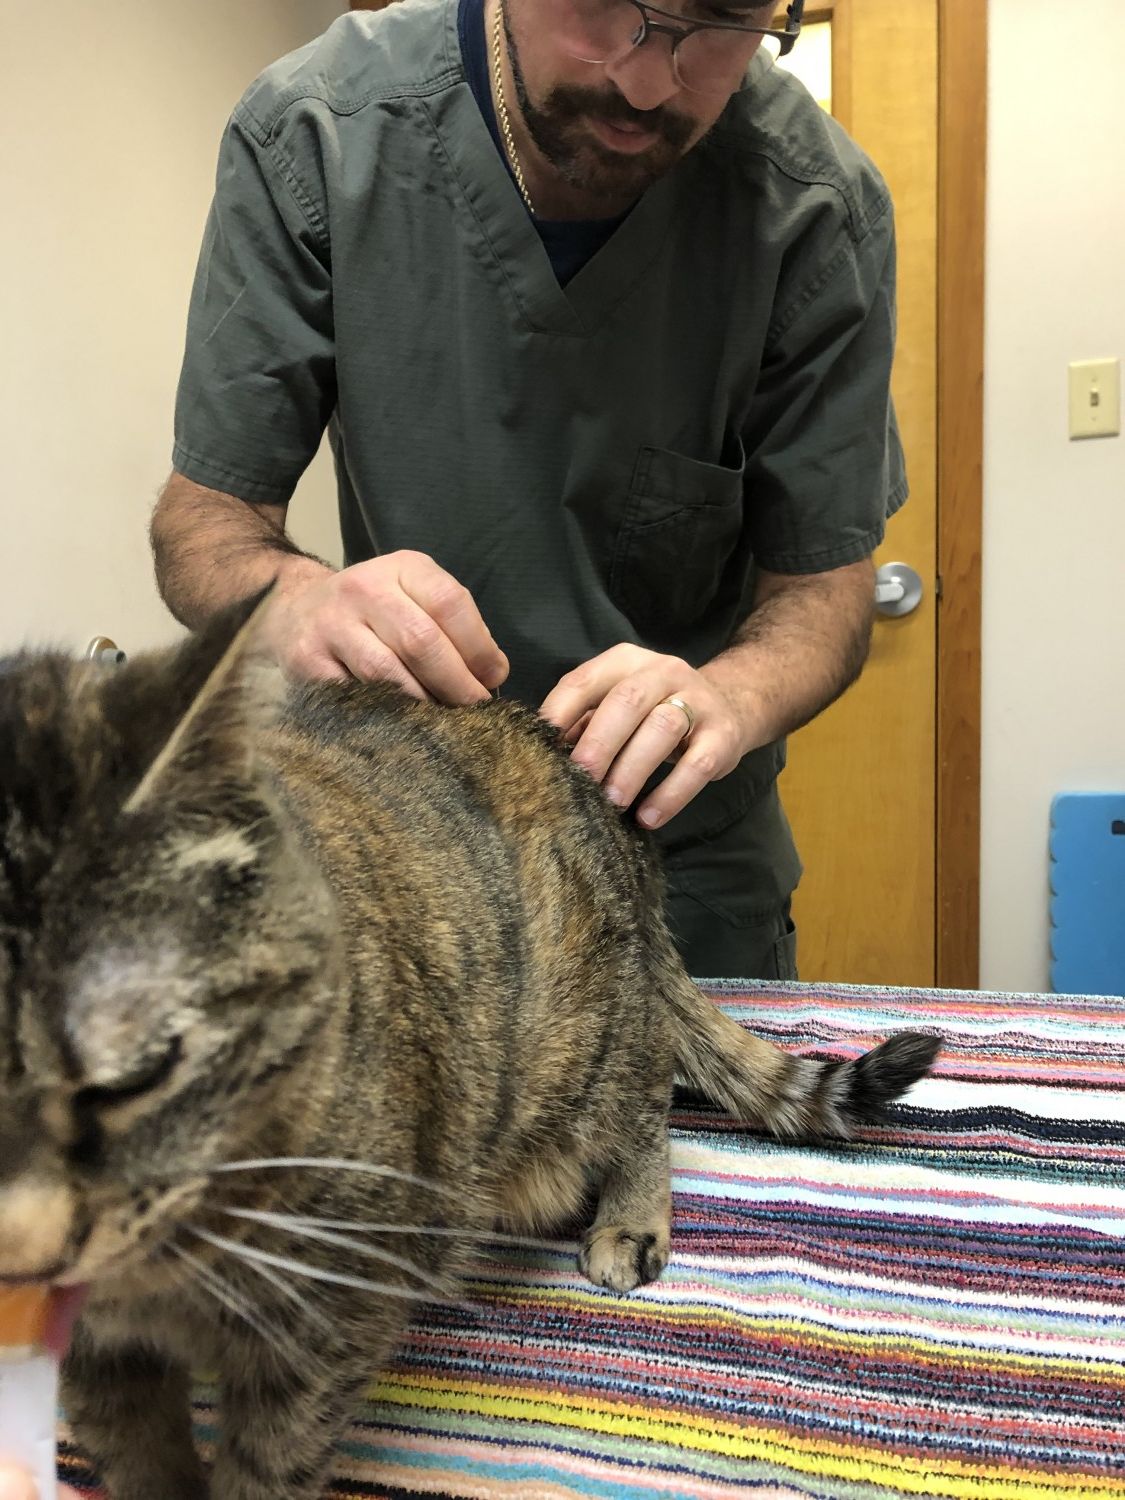 Performing Acupuncture on a Cat